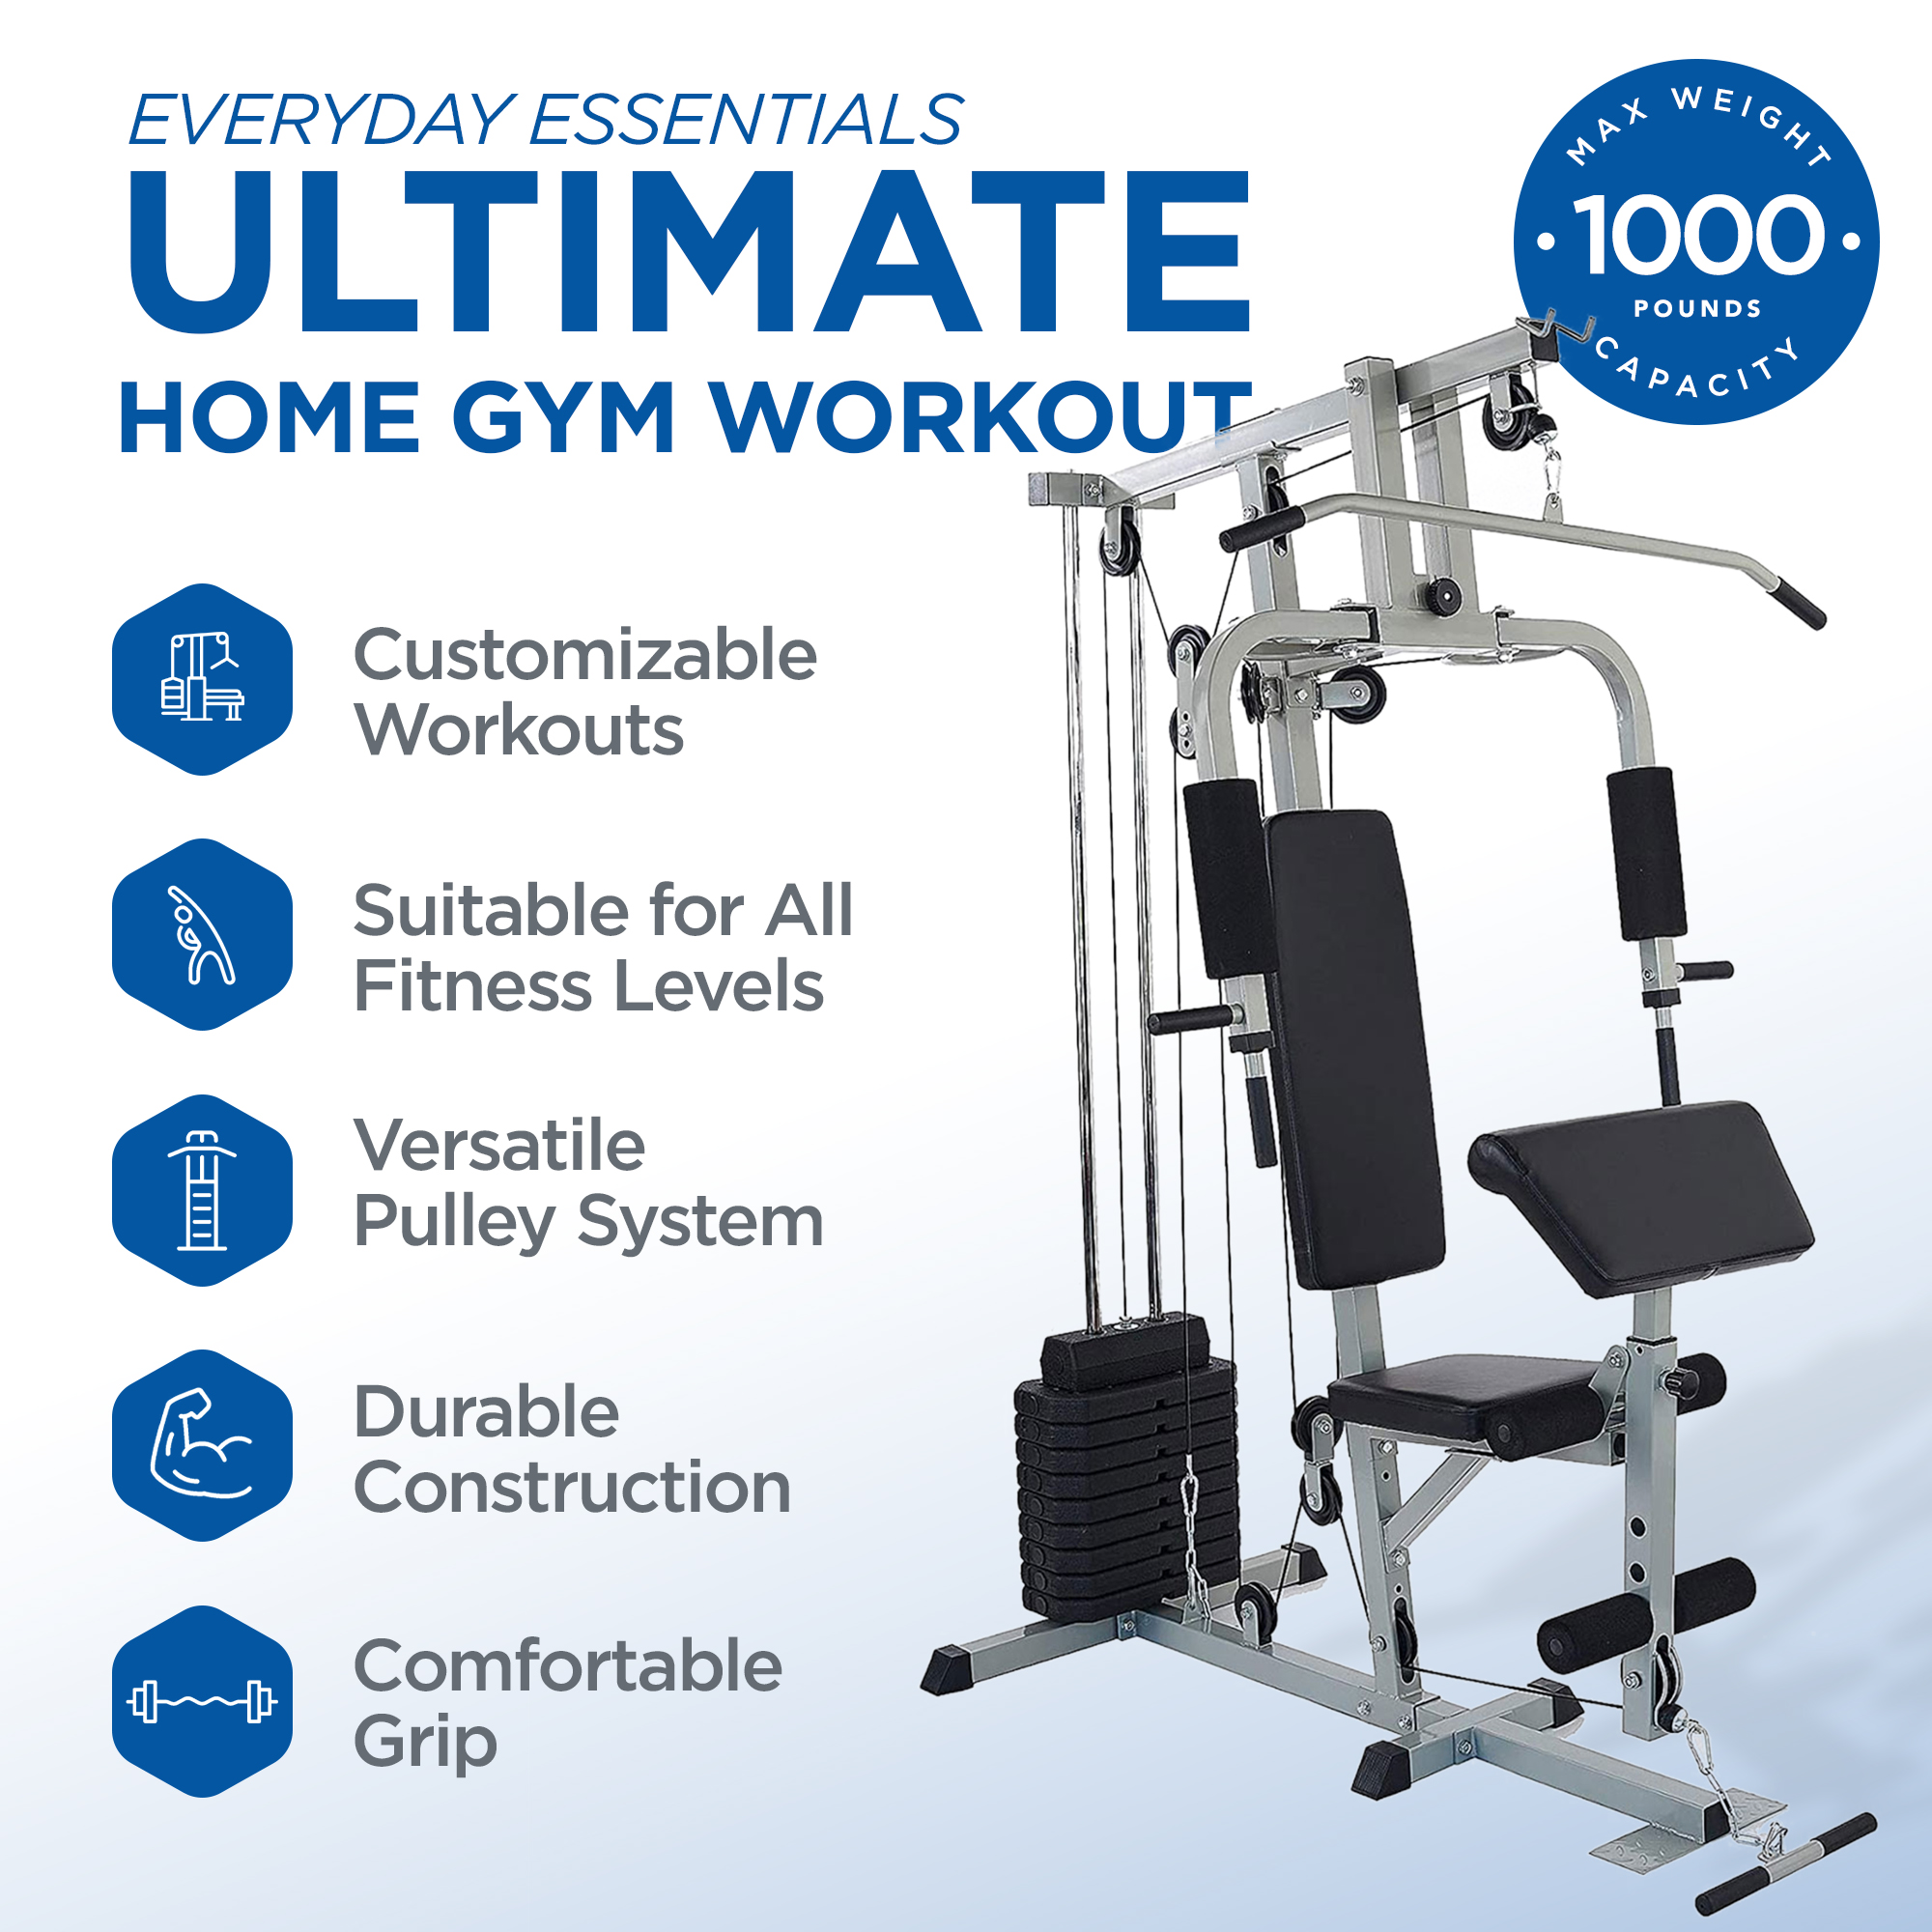 Everyday Essentials Home Gym Exercise Equipment Bench Strength Workout Station - image 2 of 10